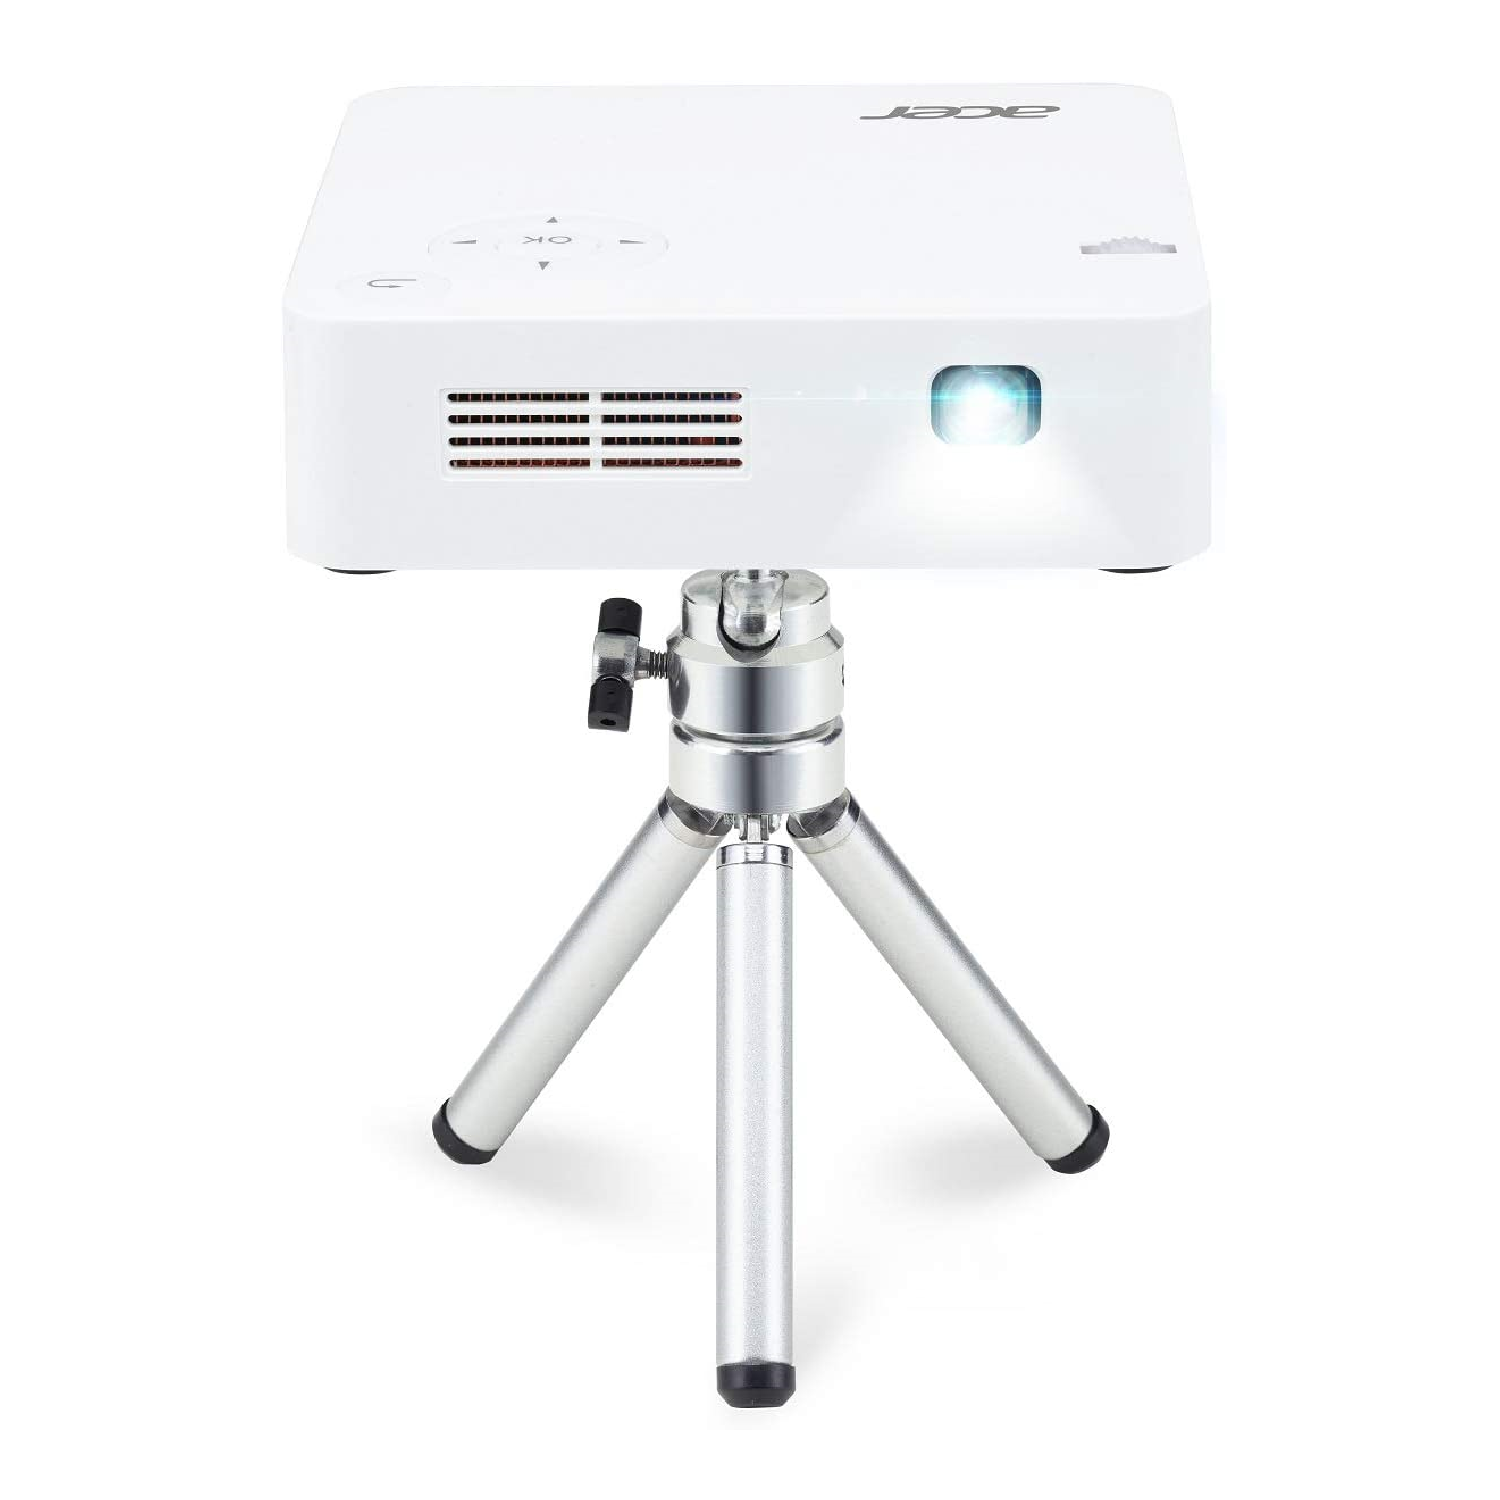 FWVGA (854 x 480) LED 300 ANSI Lumens, 16: 9 Aspect Ratio Portable Wireless Projector with Tripod   C202i acer